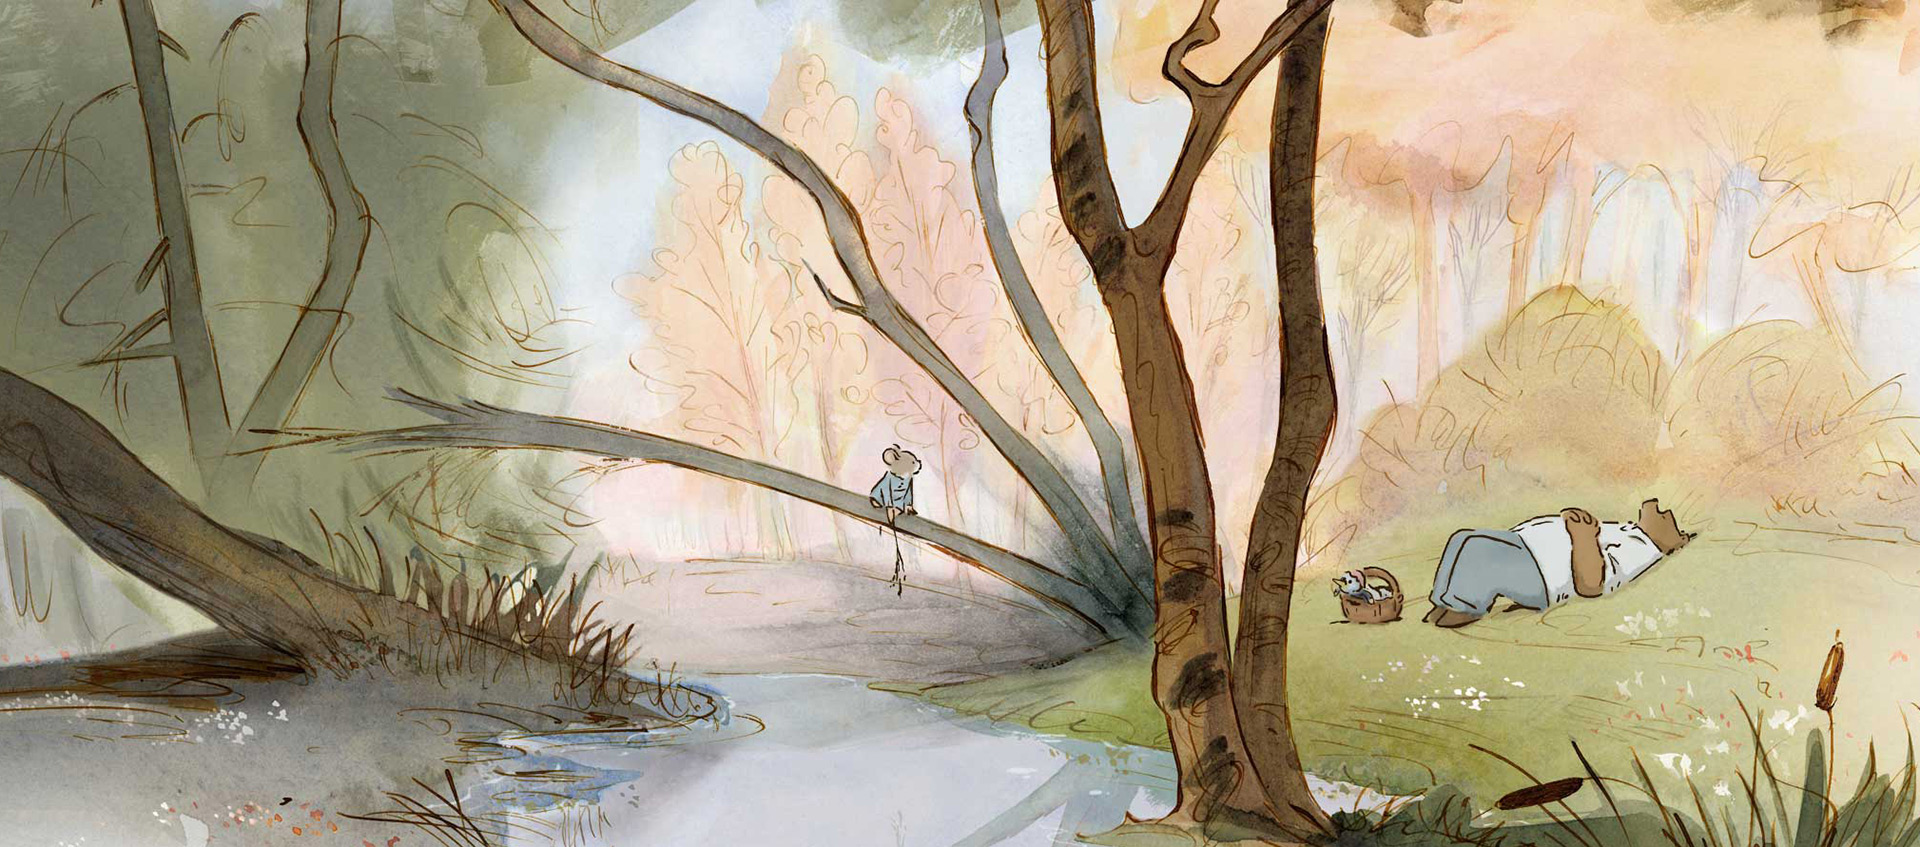 Celestine the mouse sits on a branch overhanging a river while Ernest the bear relaxes on the bank in the grass.